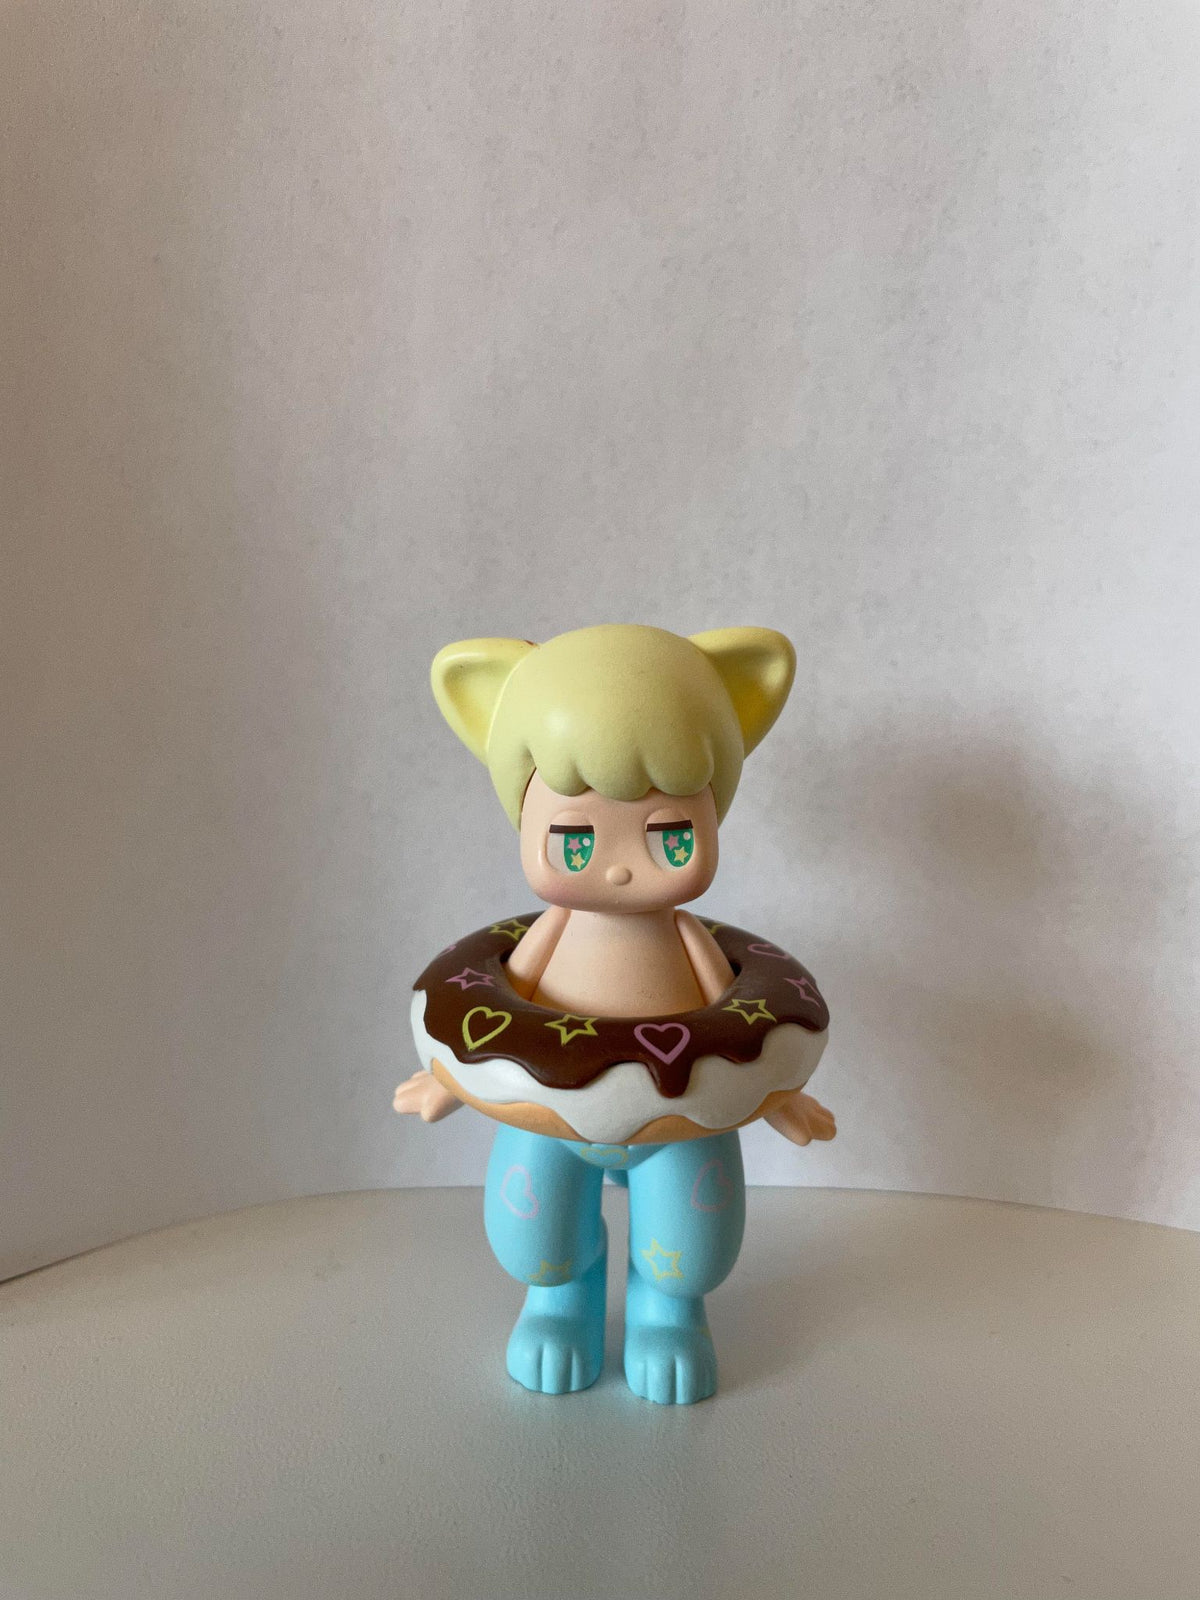 Donut - Satyr Rory Sweet as Sweets Blind Box Toy Series by Seulgie Lee x POPMART  - 1